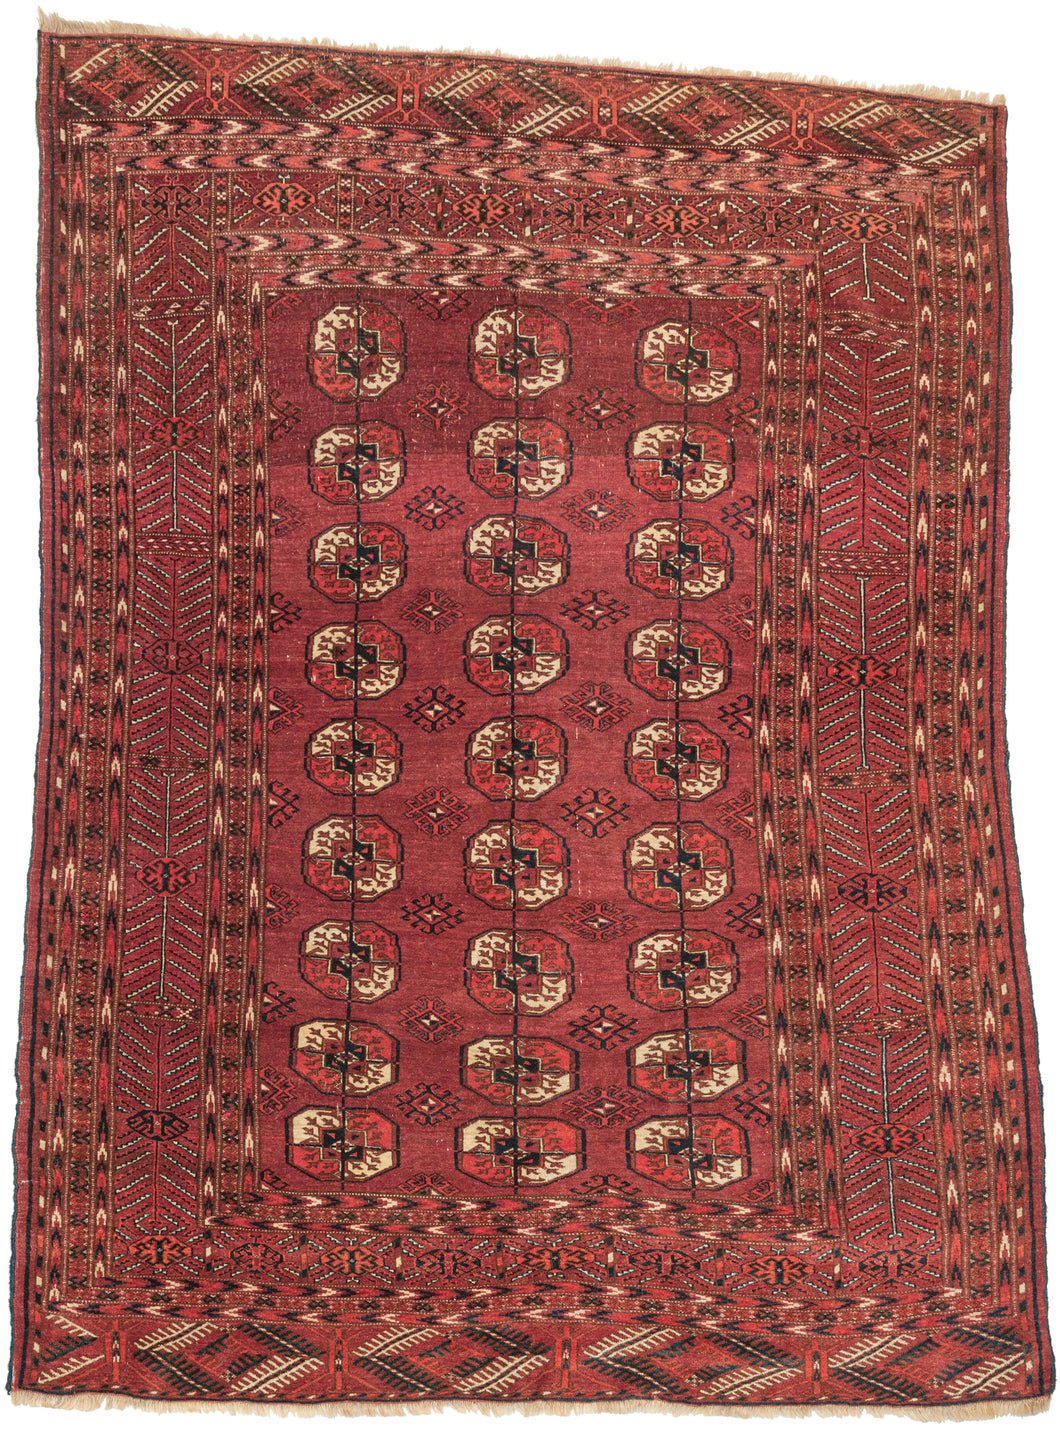 This Tekke main rug was handwoven during the second quarter of the 20th century in Turkmenistan.  The field features a grid of classic plump Tekke main guls and more skeletal latch-hooked secondary guls. Nicely spaced and slightly off-kilter giving it an organic and free-flowing vibe. It is framed by a dynamic main and minor featuring vegetal forms rams head and directional arrows with a simple yet effective palette of deep indigo, ivory, brown, and two reds. In an unusual and very hard to find size for the